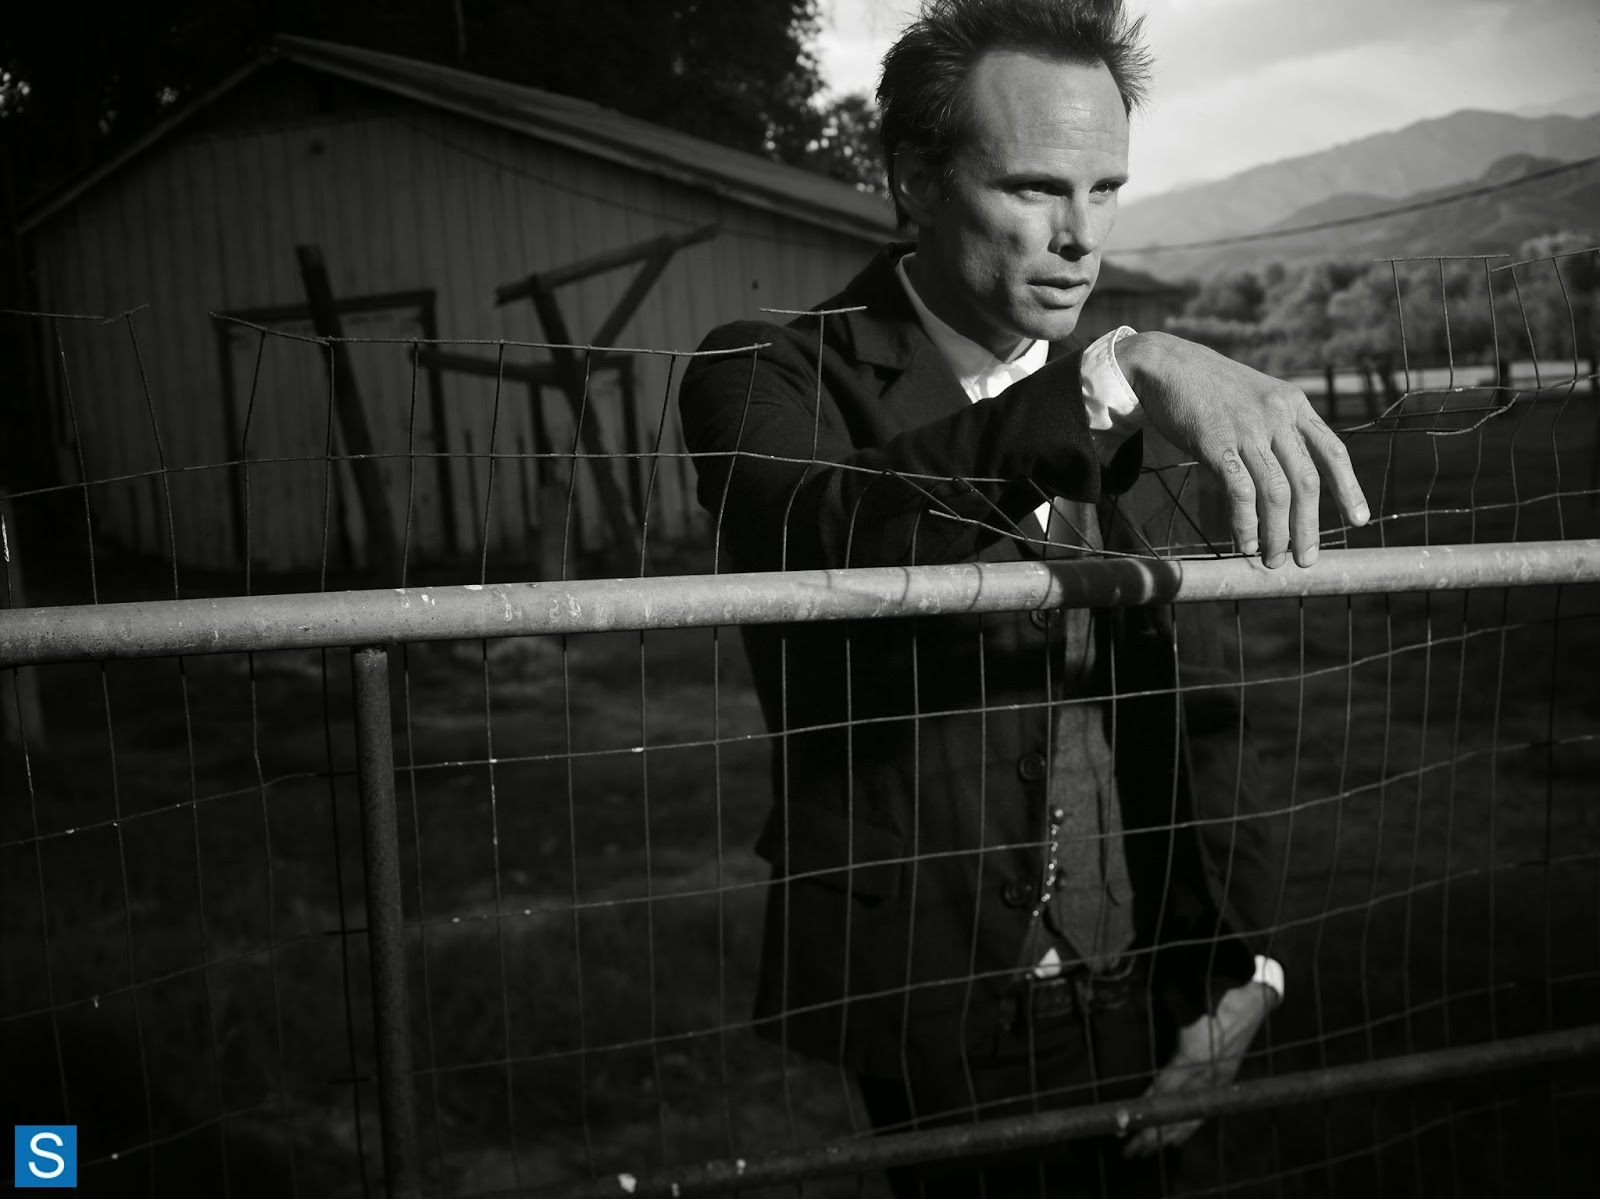 Justified - 5x02 - The Kids Aren't All Right  - LIVE TWEETING (SPOILERS) *COMPLETED*